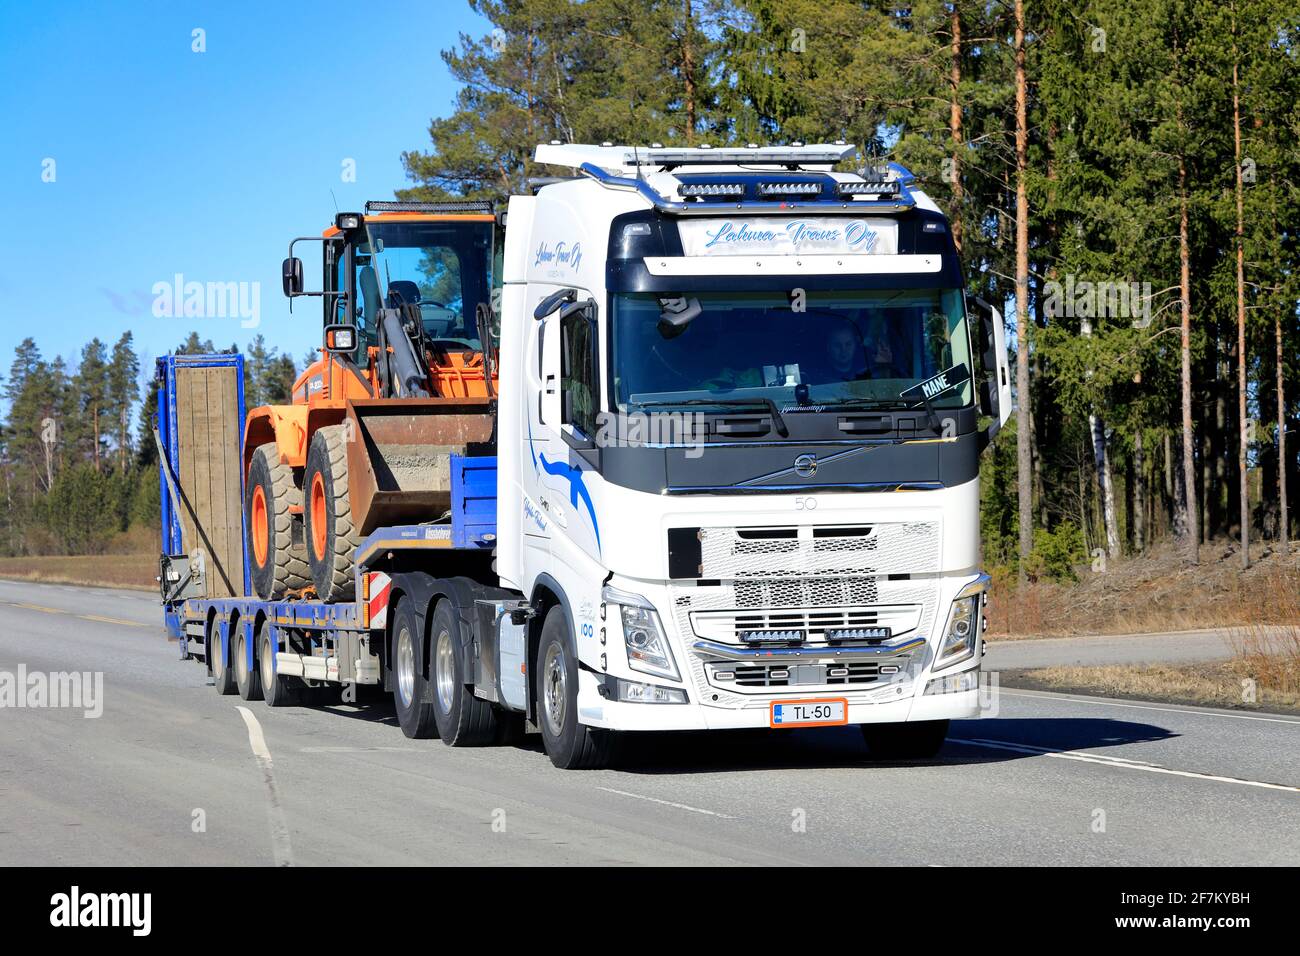 Raasepori, Finland. May 27, 2021. Volvo Trucks Finland presents new Volvo FMX  540 Xpro Winter as part of their new range Stock Photo - Alamy